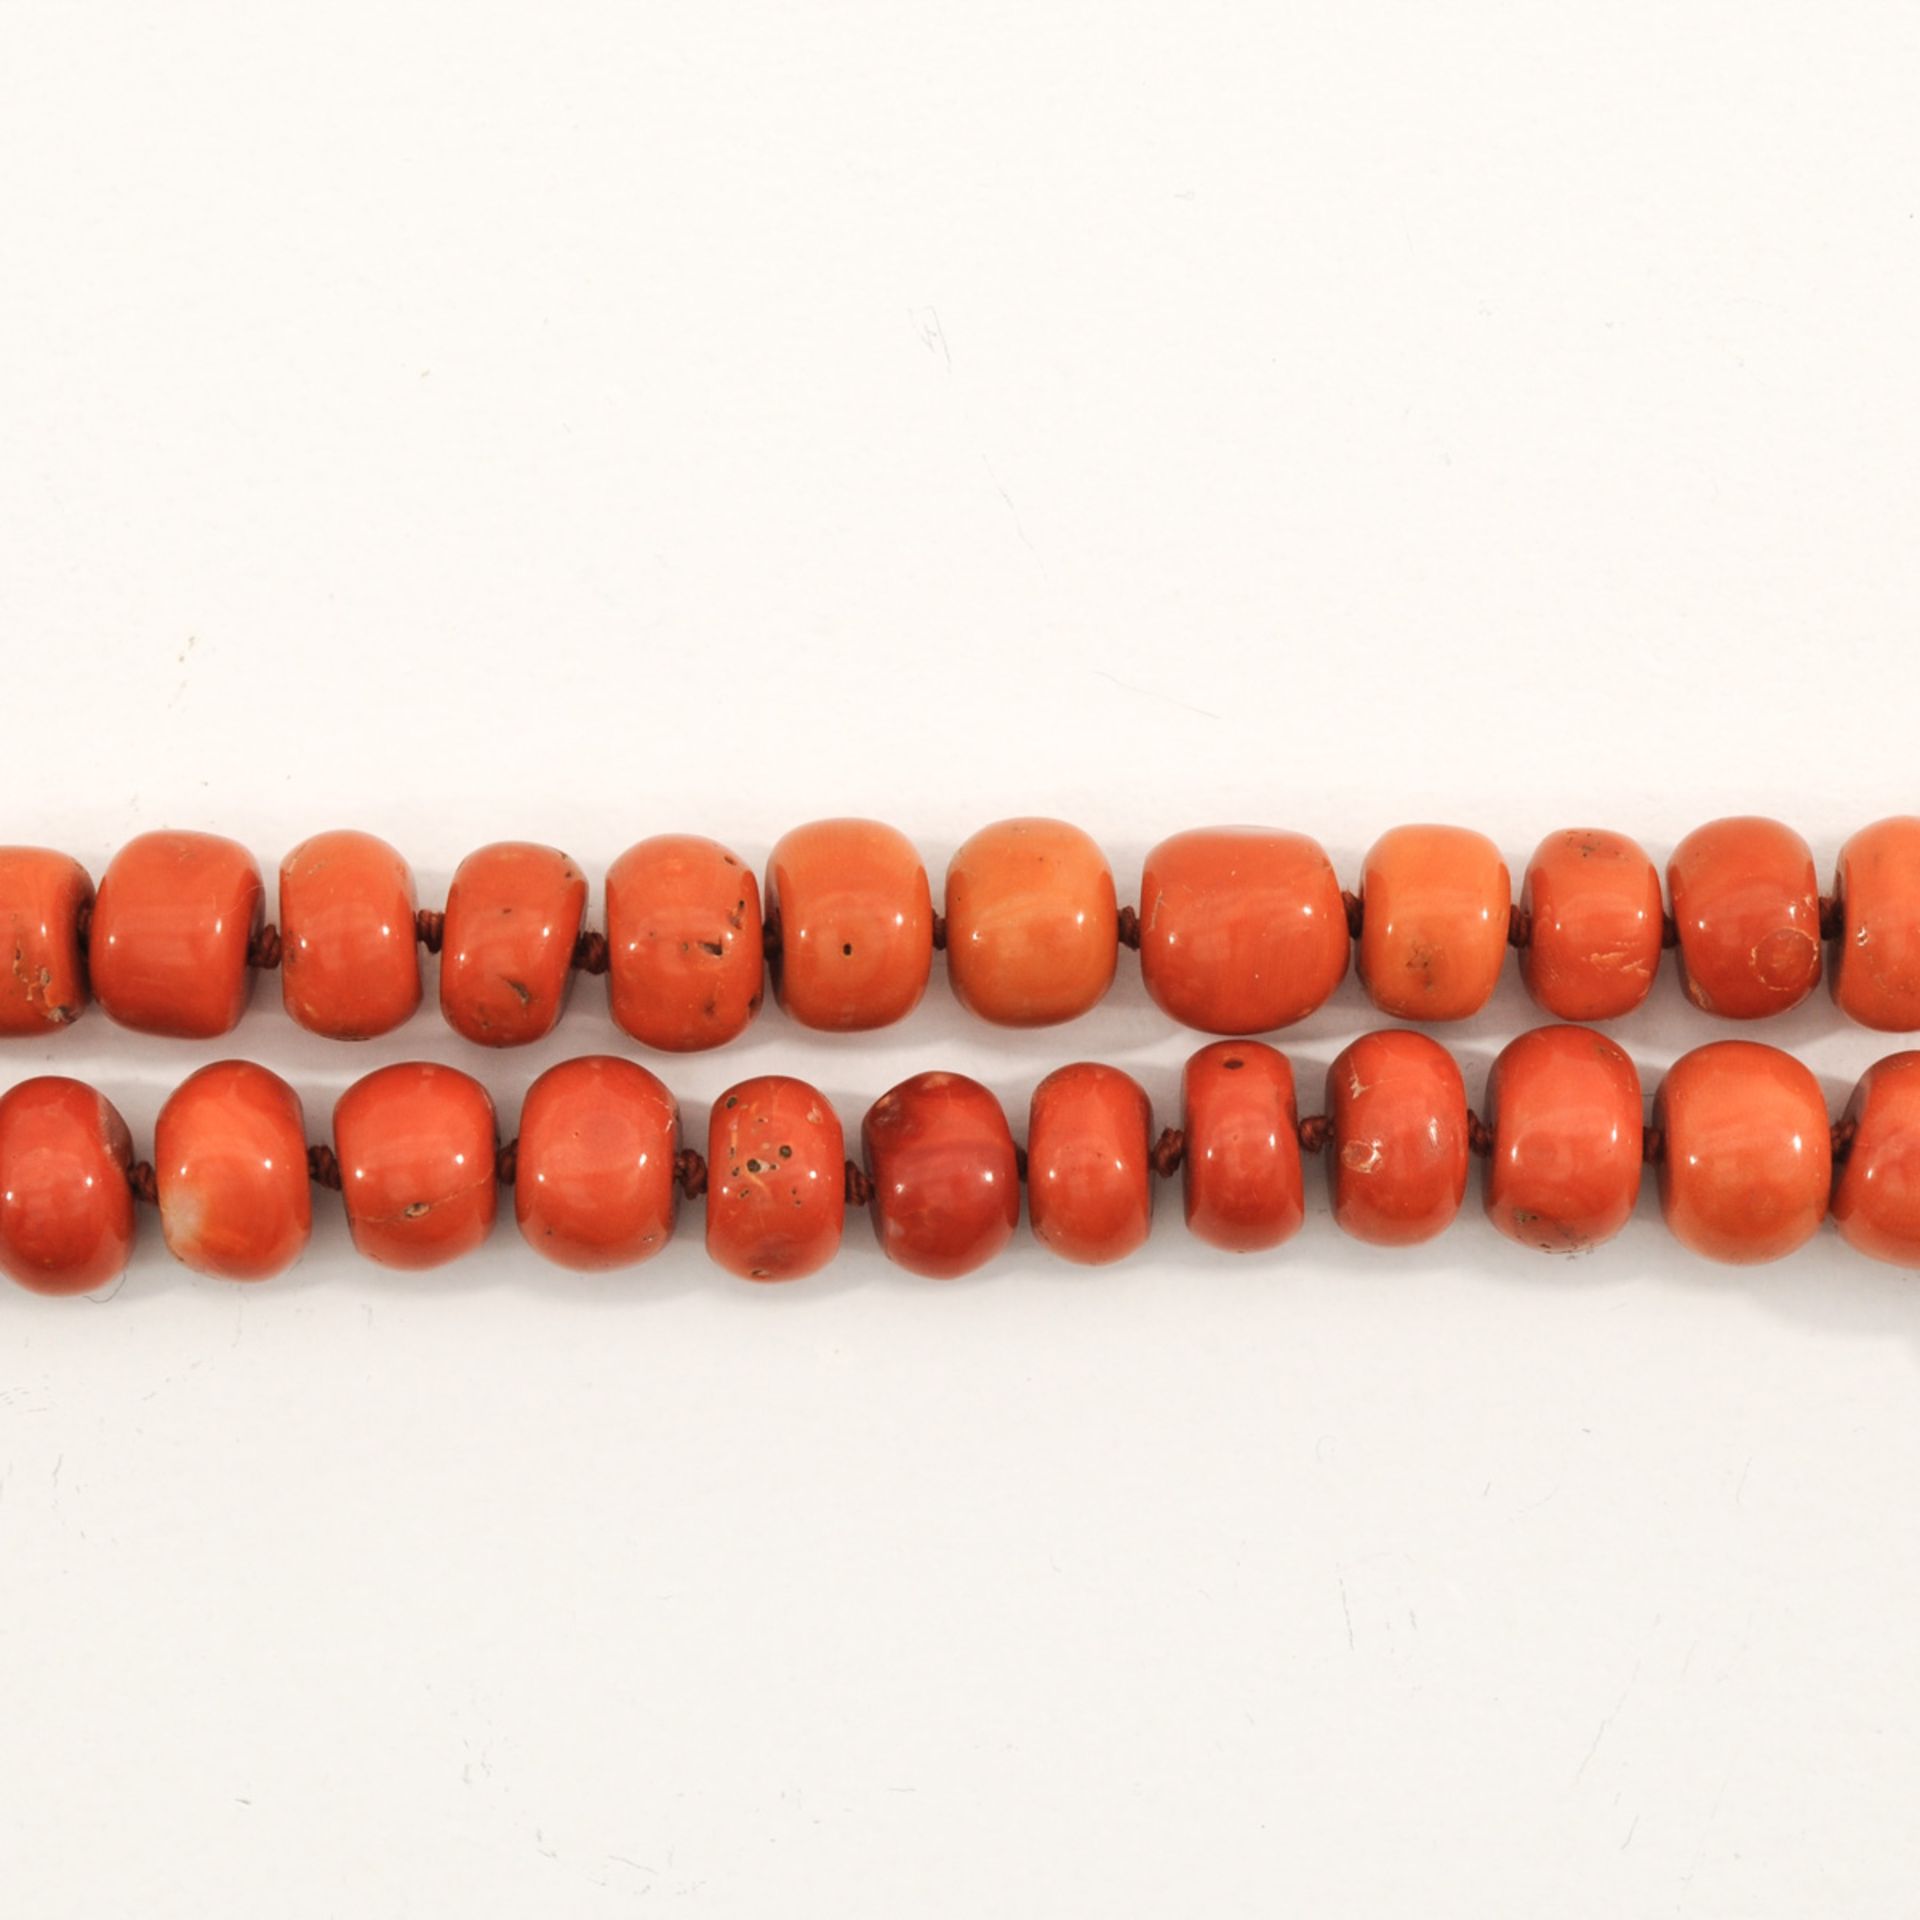 A Red Coral Necklace - Image 2 of 2